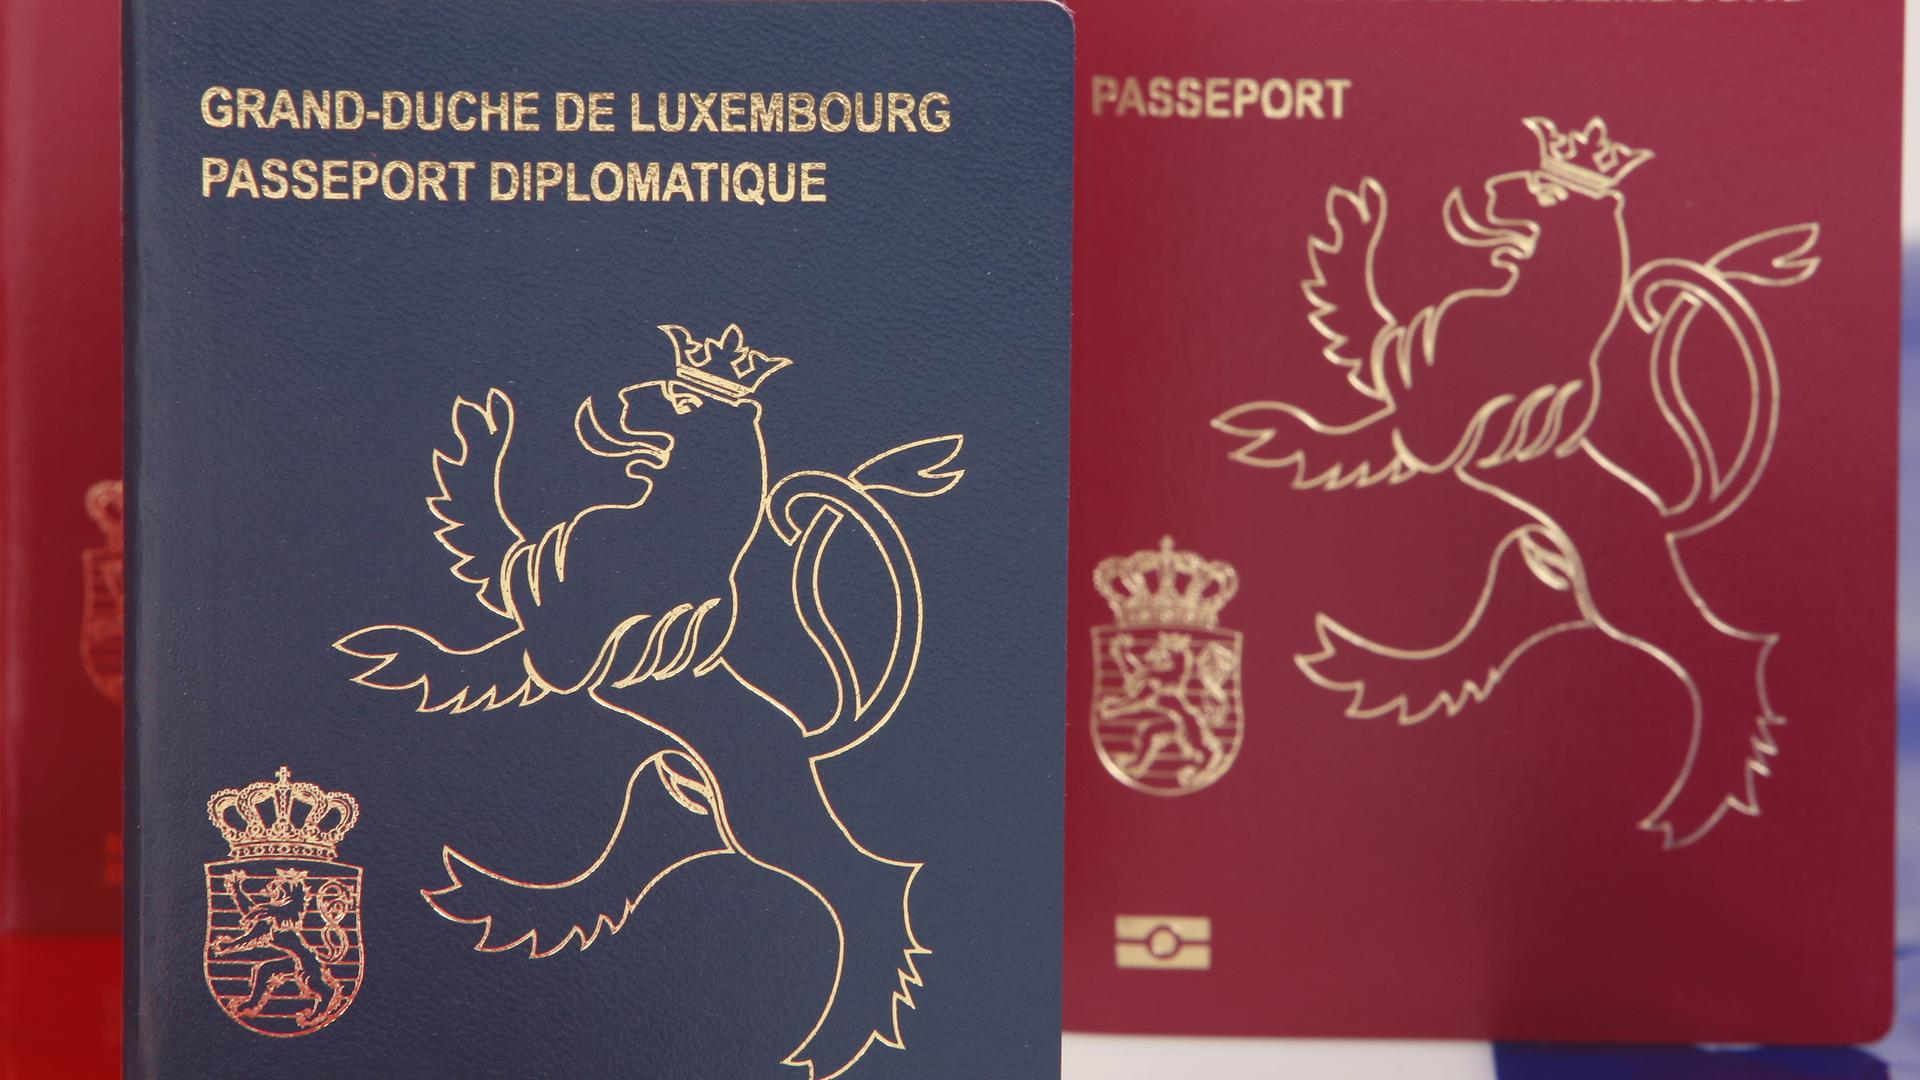 A Luxembourgish passport offers visa-free travel to 189 countries in the world 